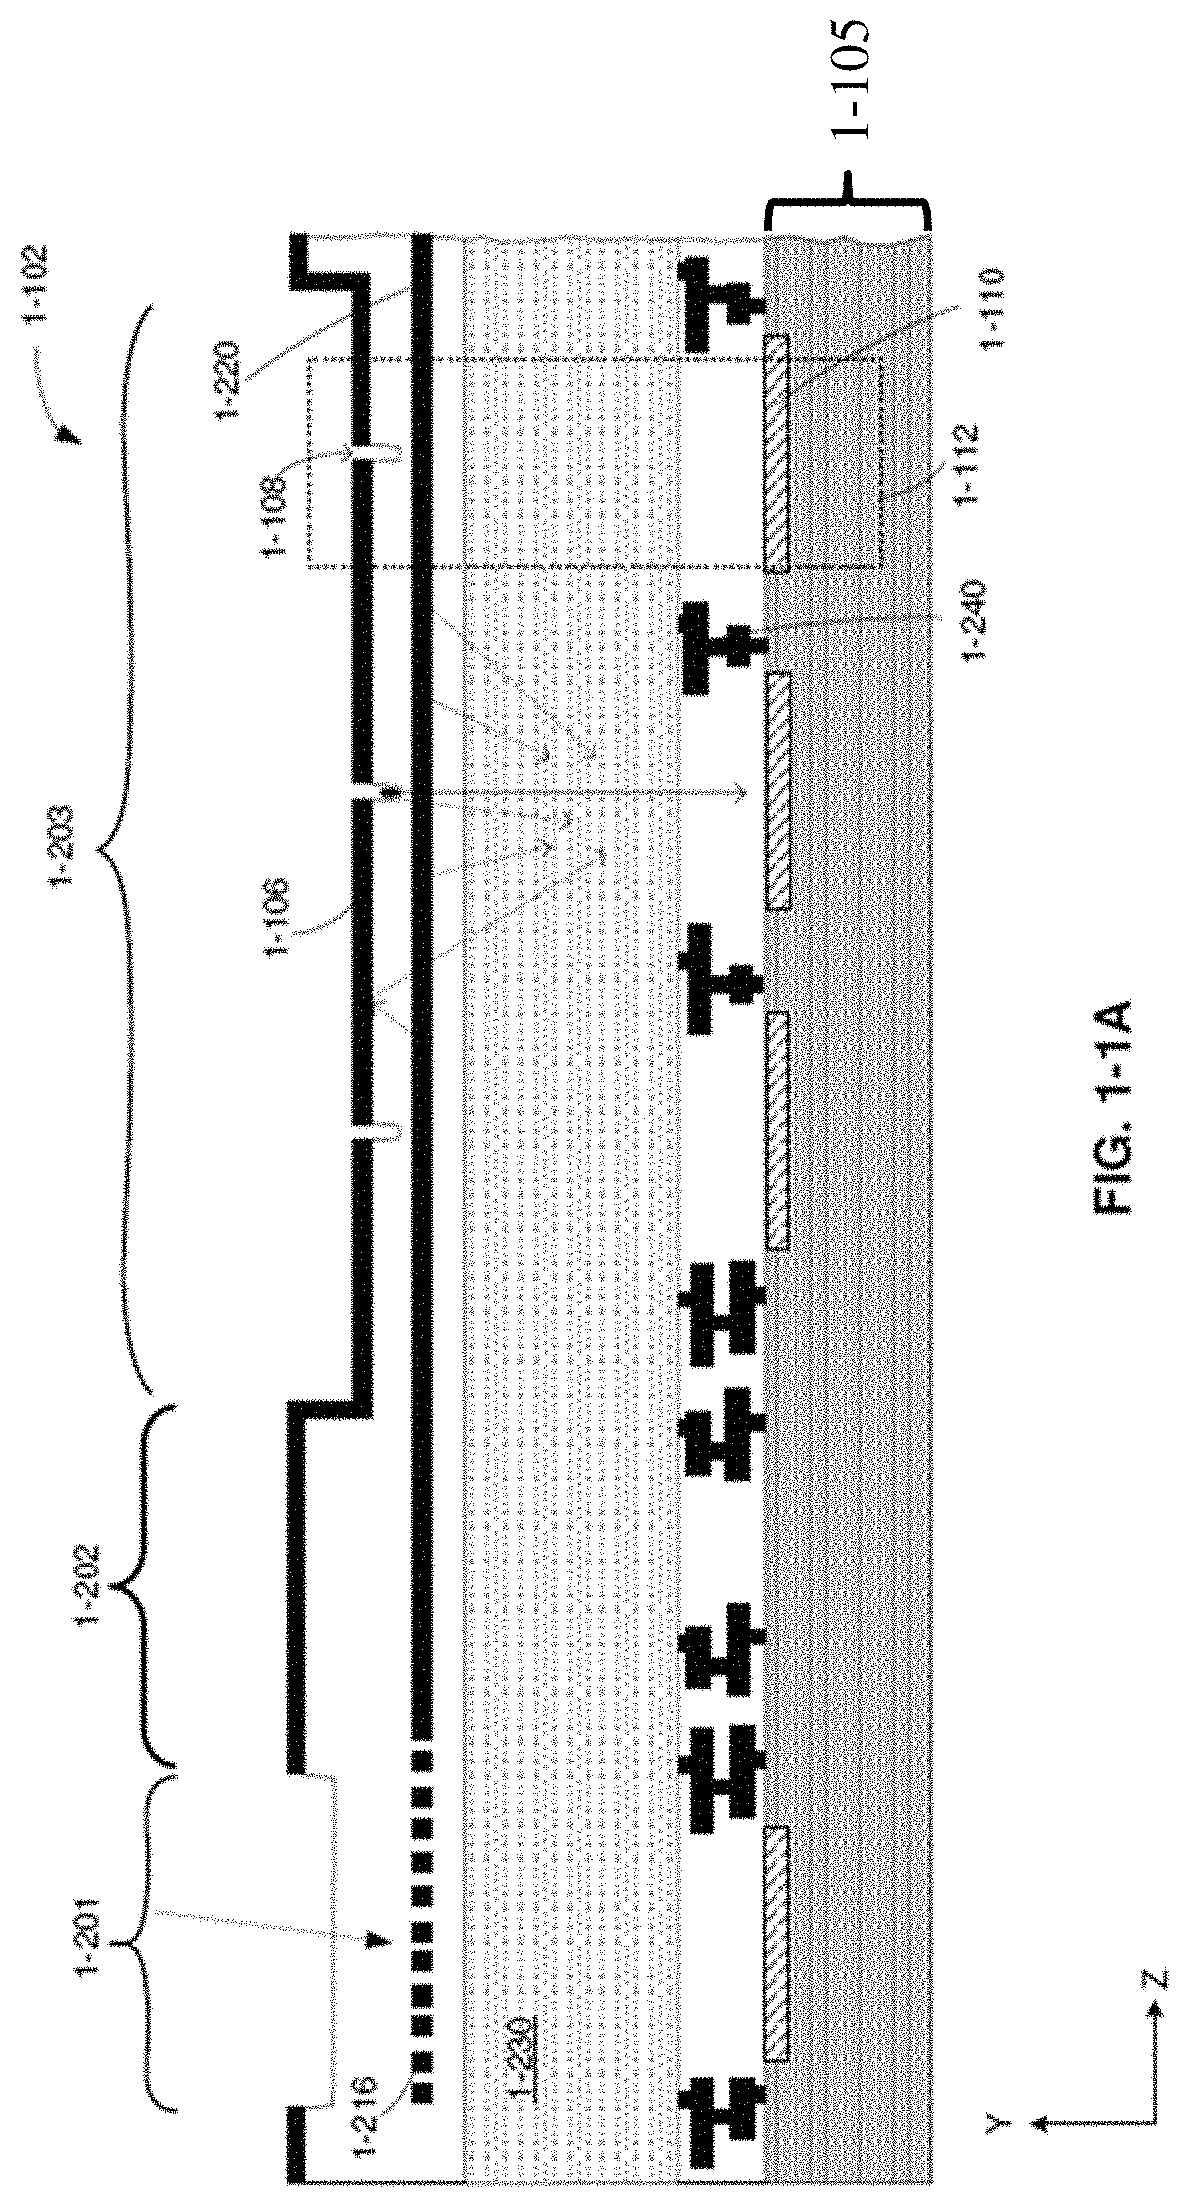 Optical and electrical secondary path rejection